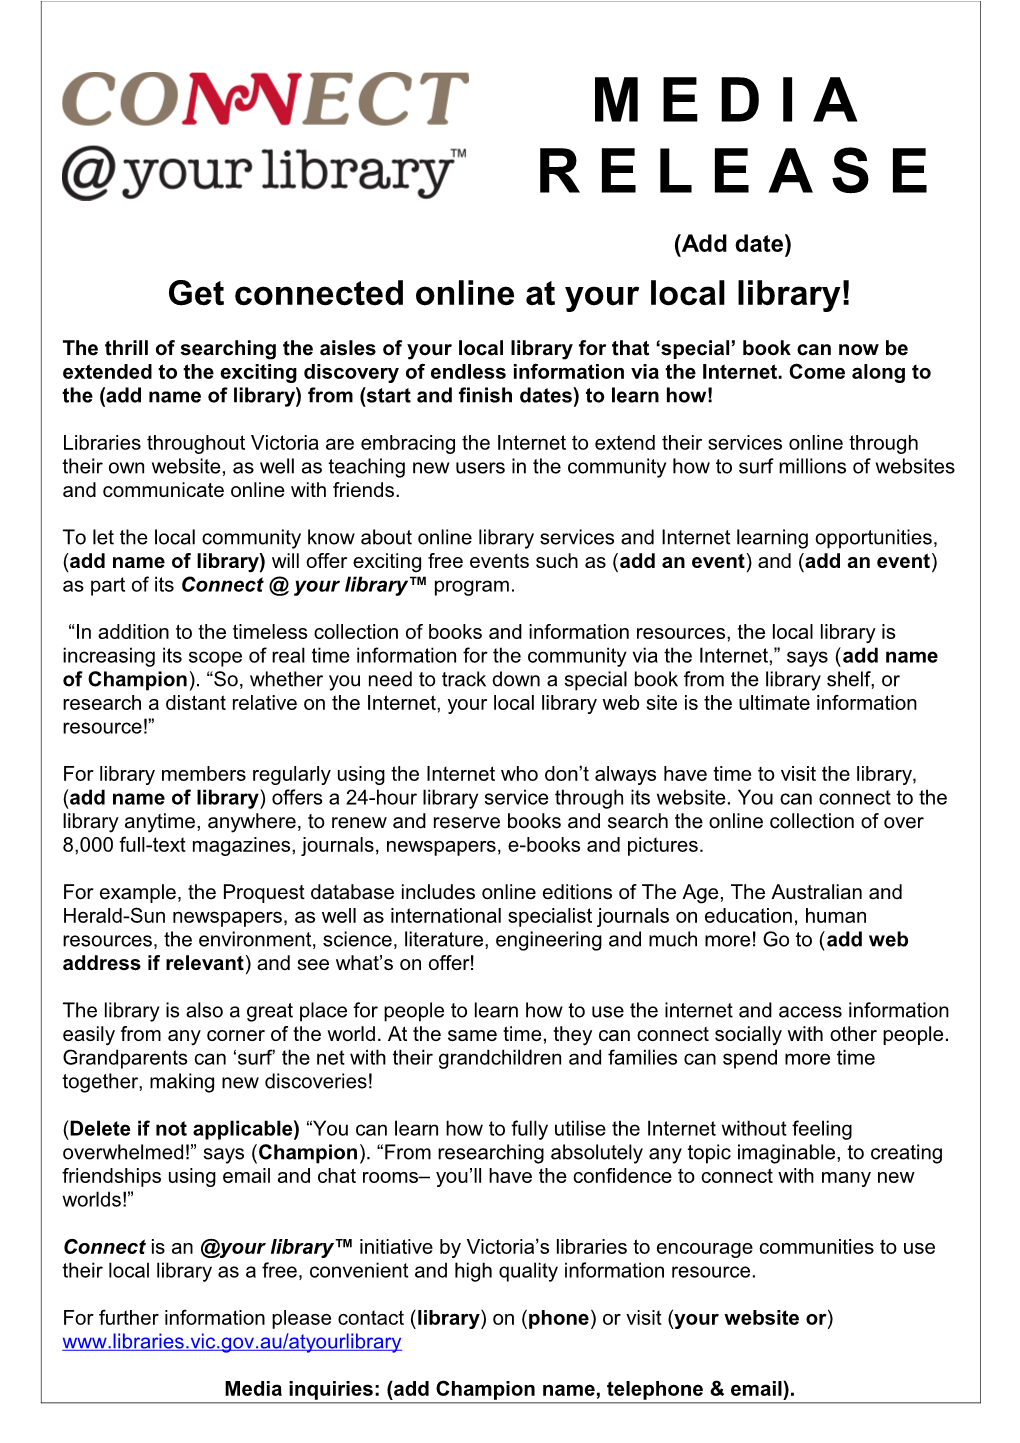 Get Connected Online at Your Local Library!